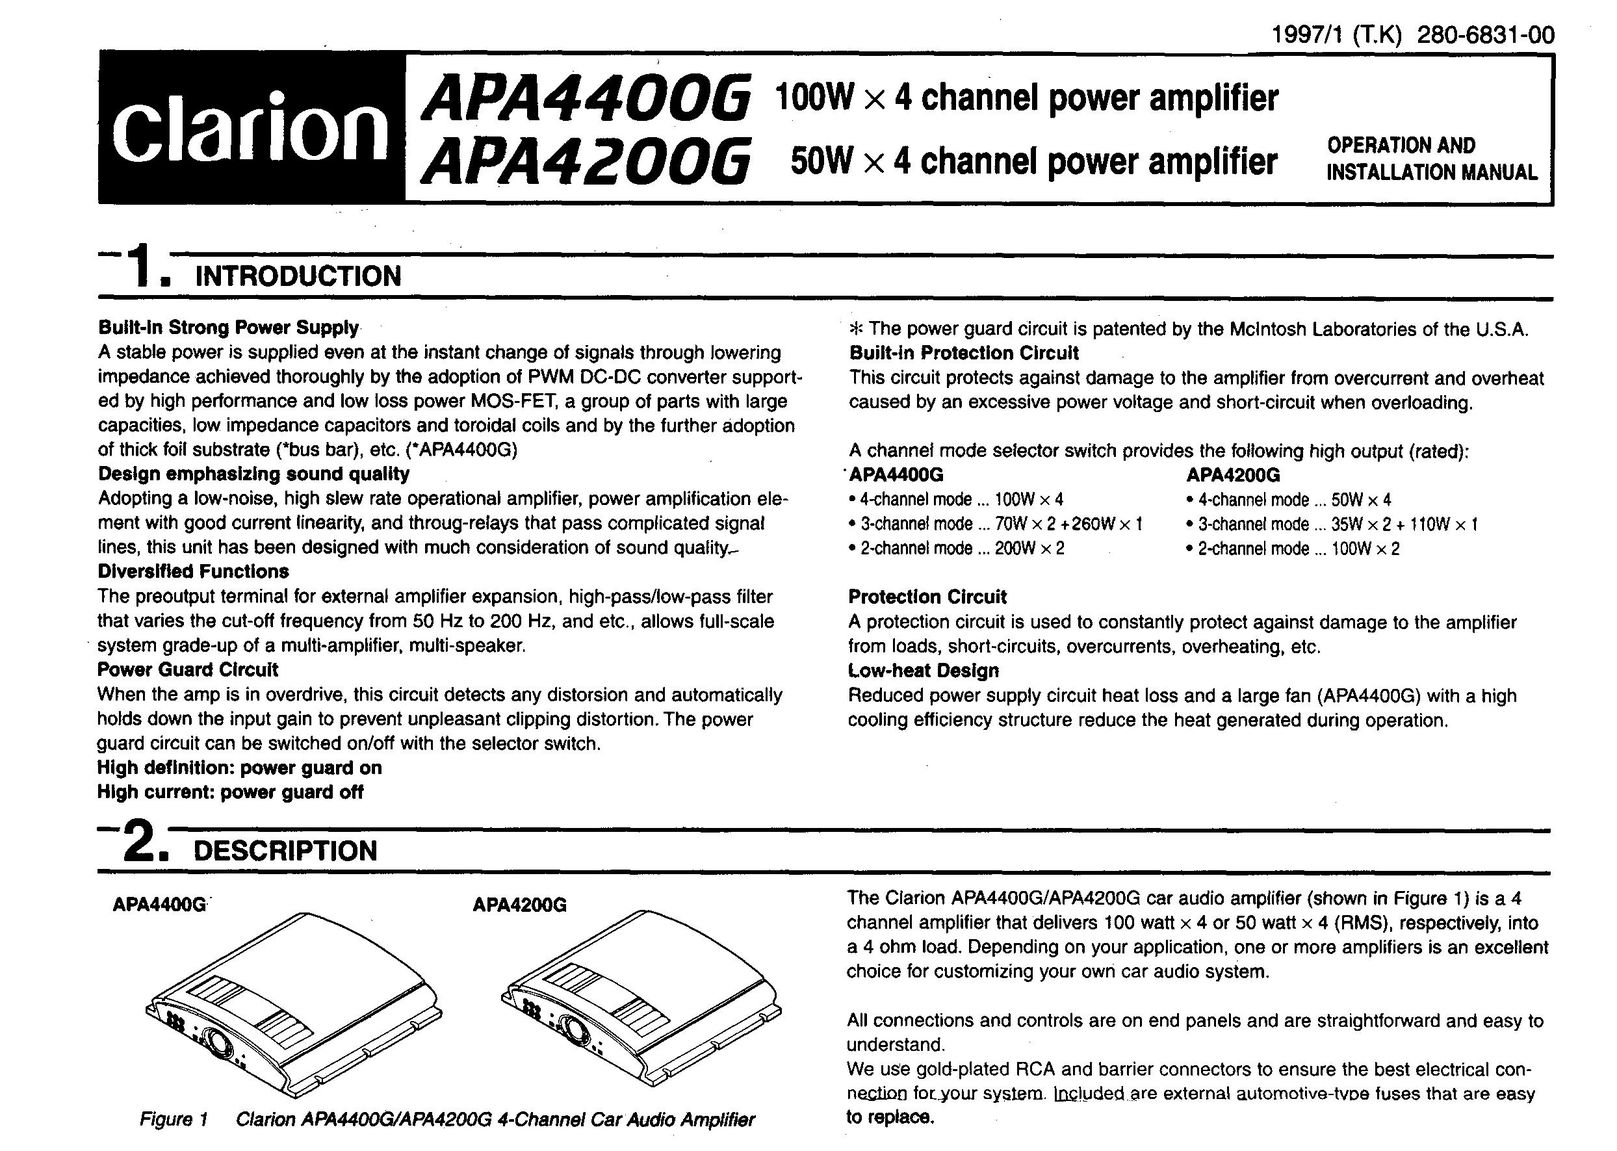 Clarion APA4400G Stereo Amplifier User Manual